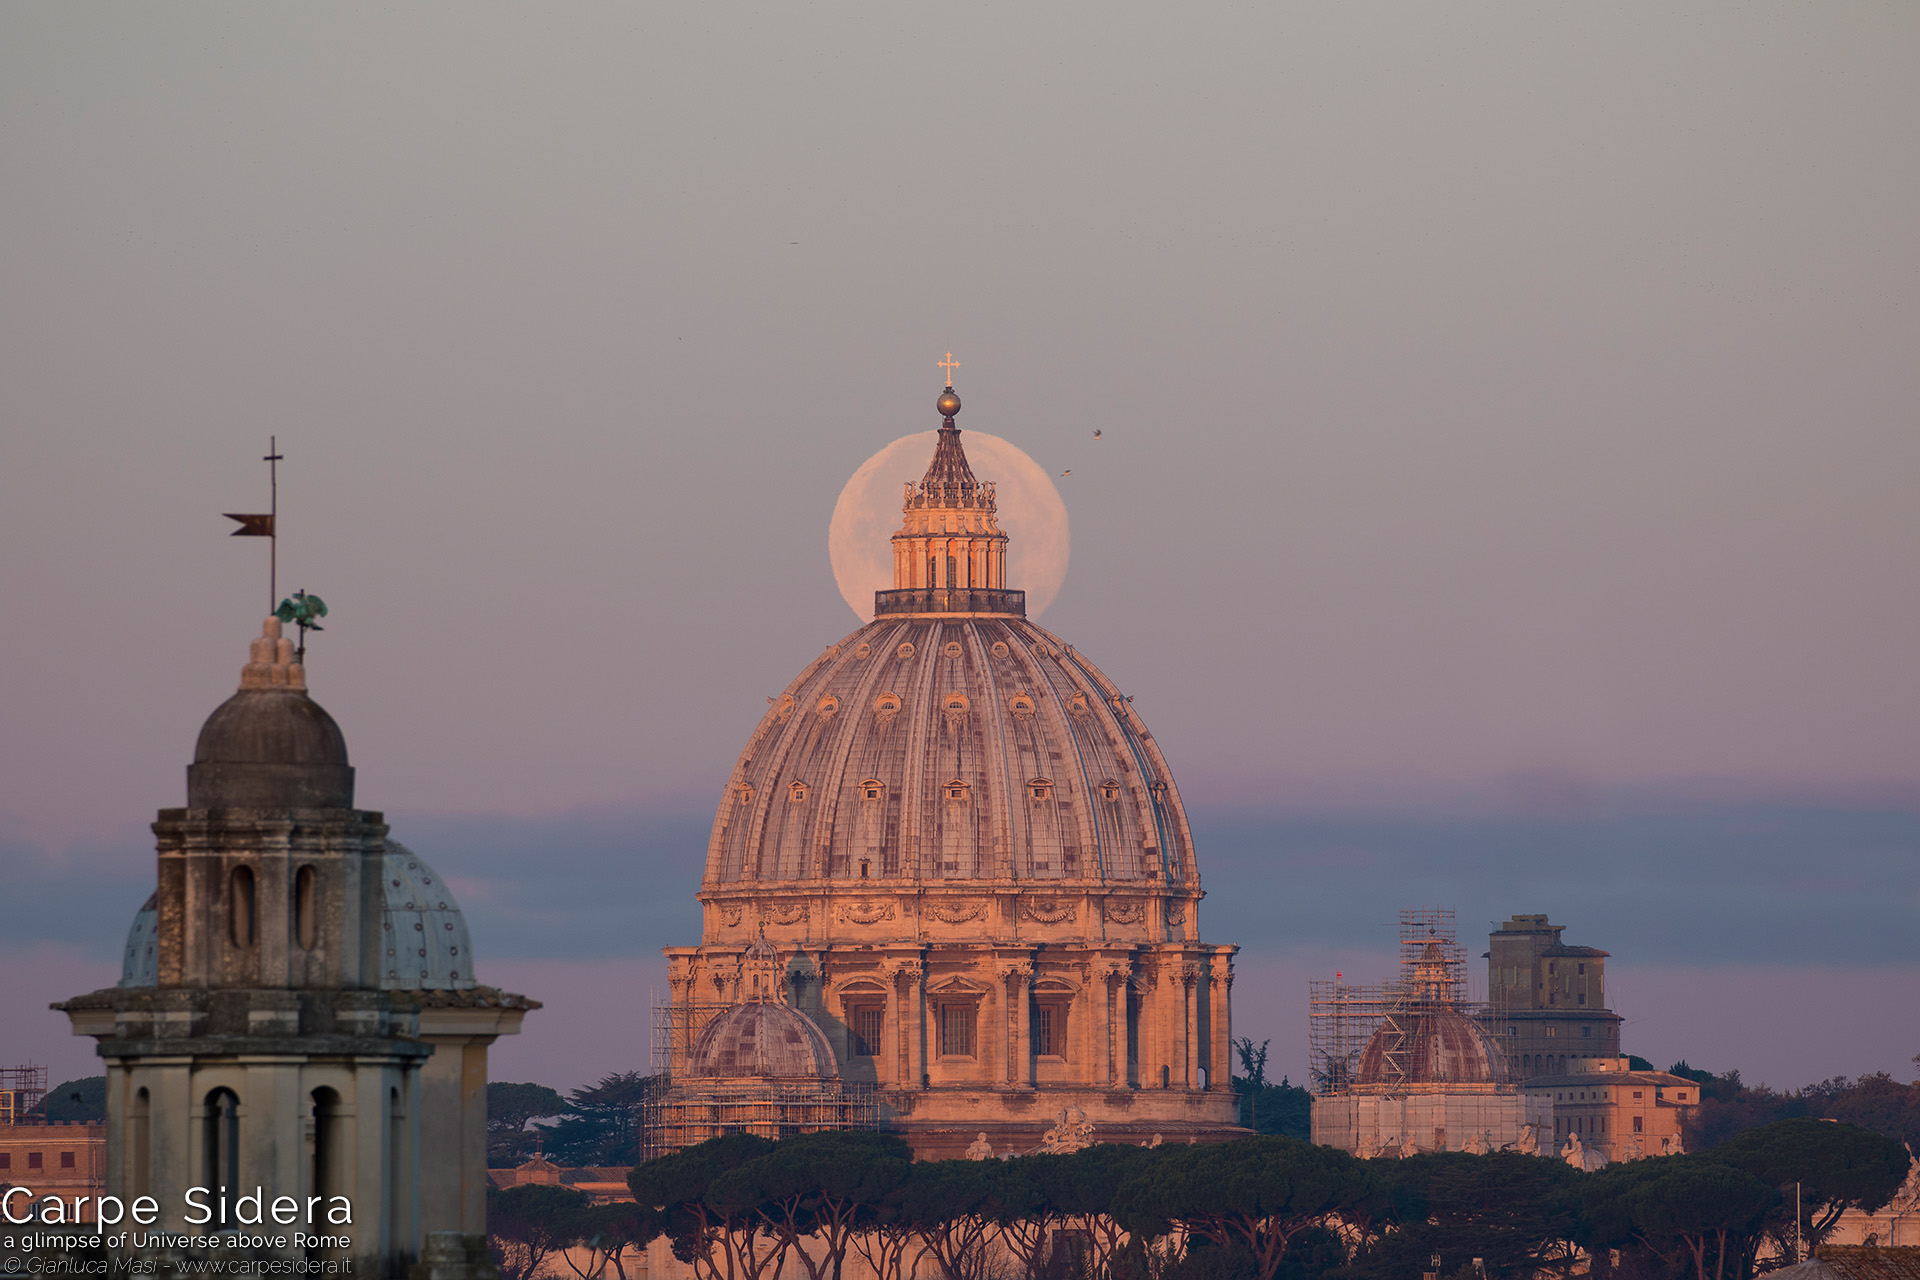 10. The dome of St. Peter's "eclipses" the 4 Dec. 2017 Supermoon.